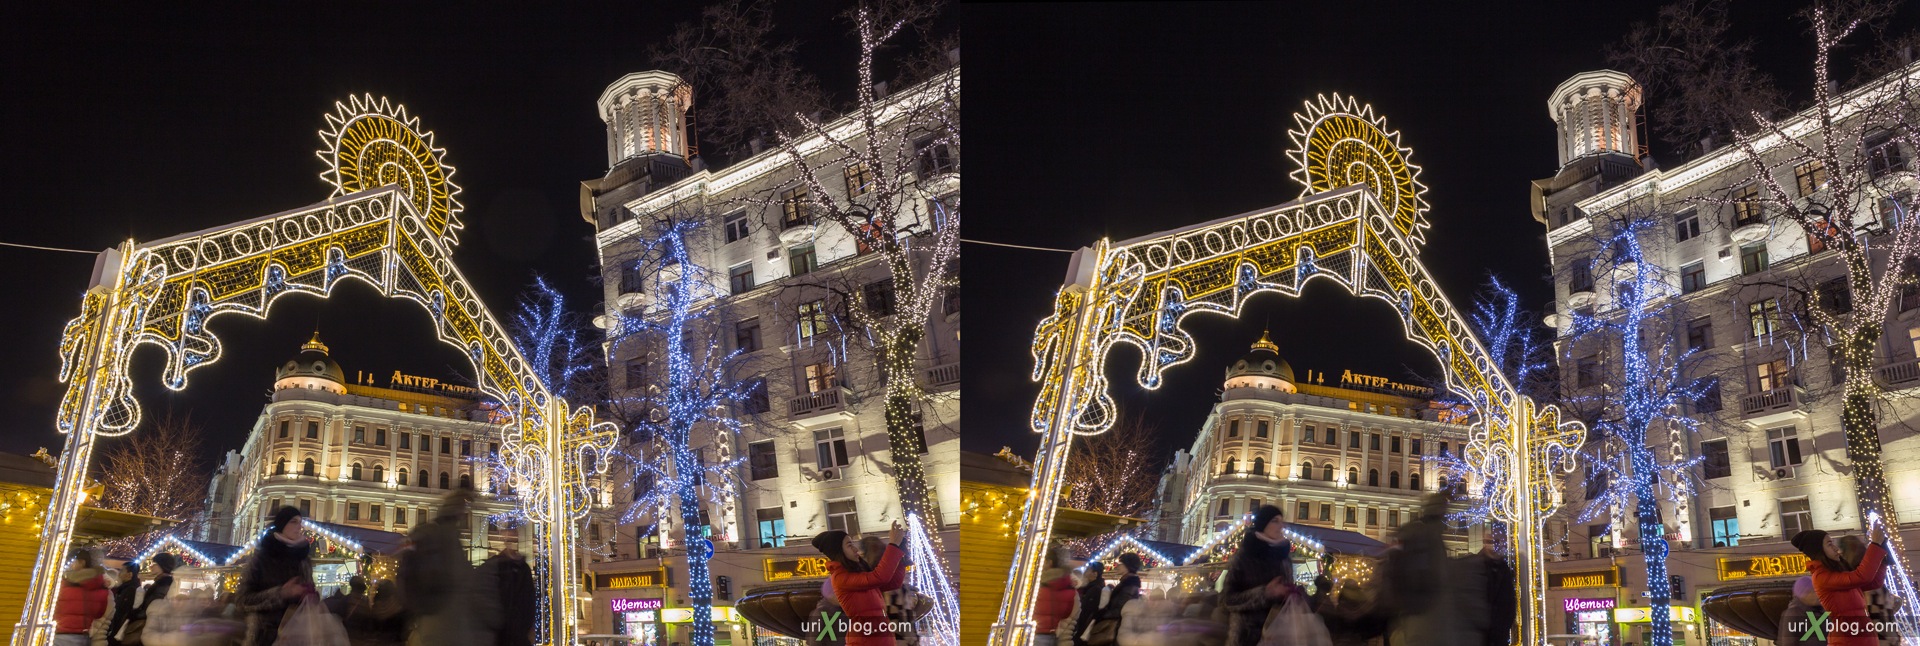 2013, Moscow, Russia, winter, New Year, night, lights, 3D, stereo pair, cross-eyed, crossview, cross view stereo pair, stereoscopic